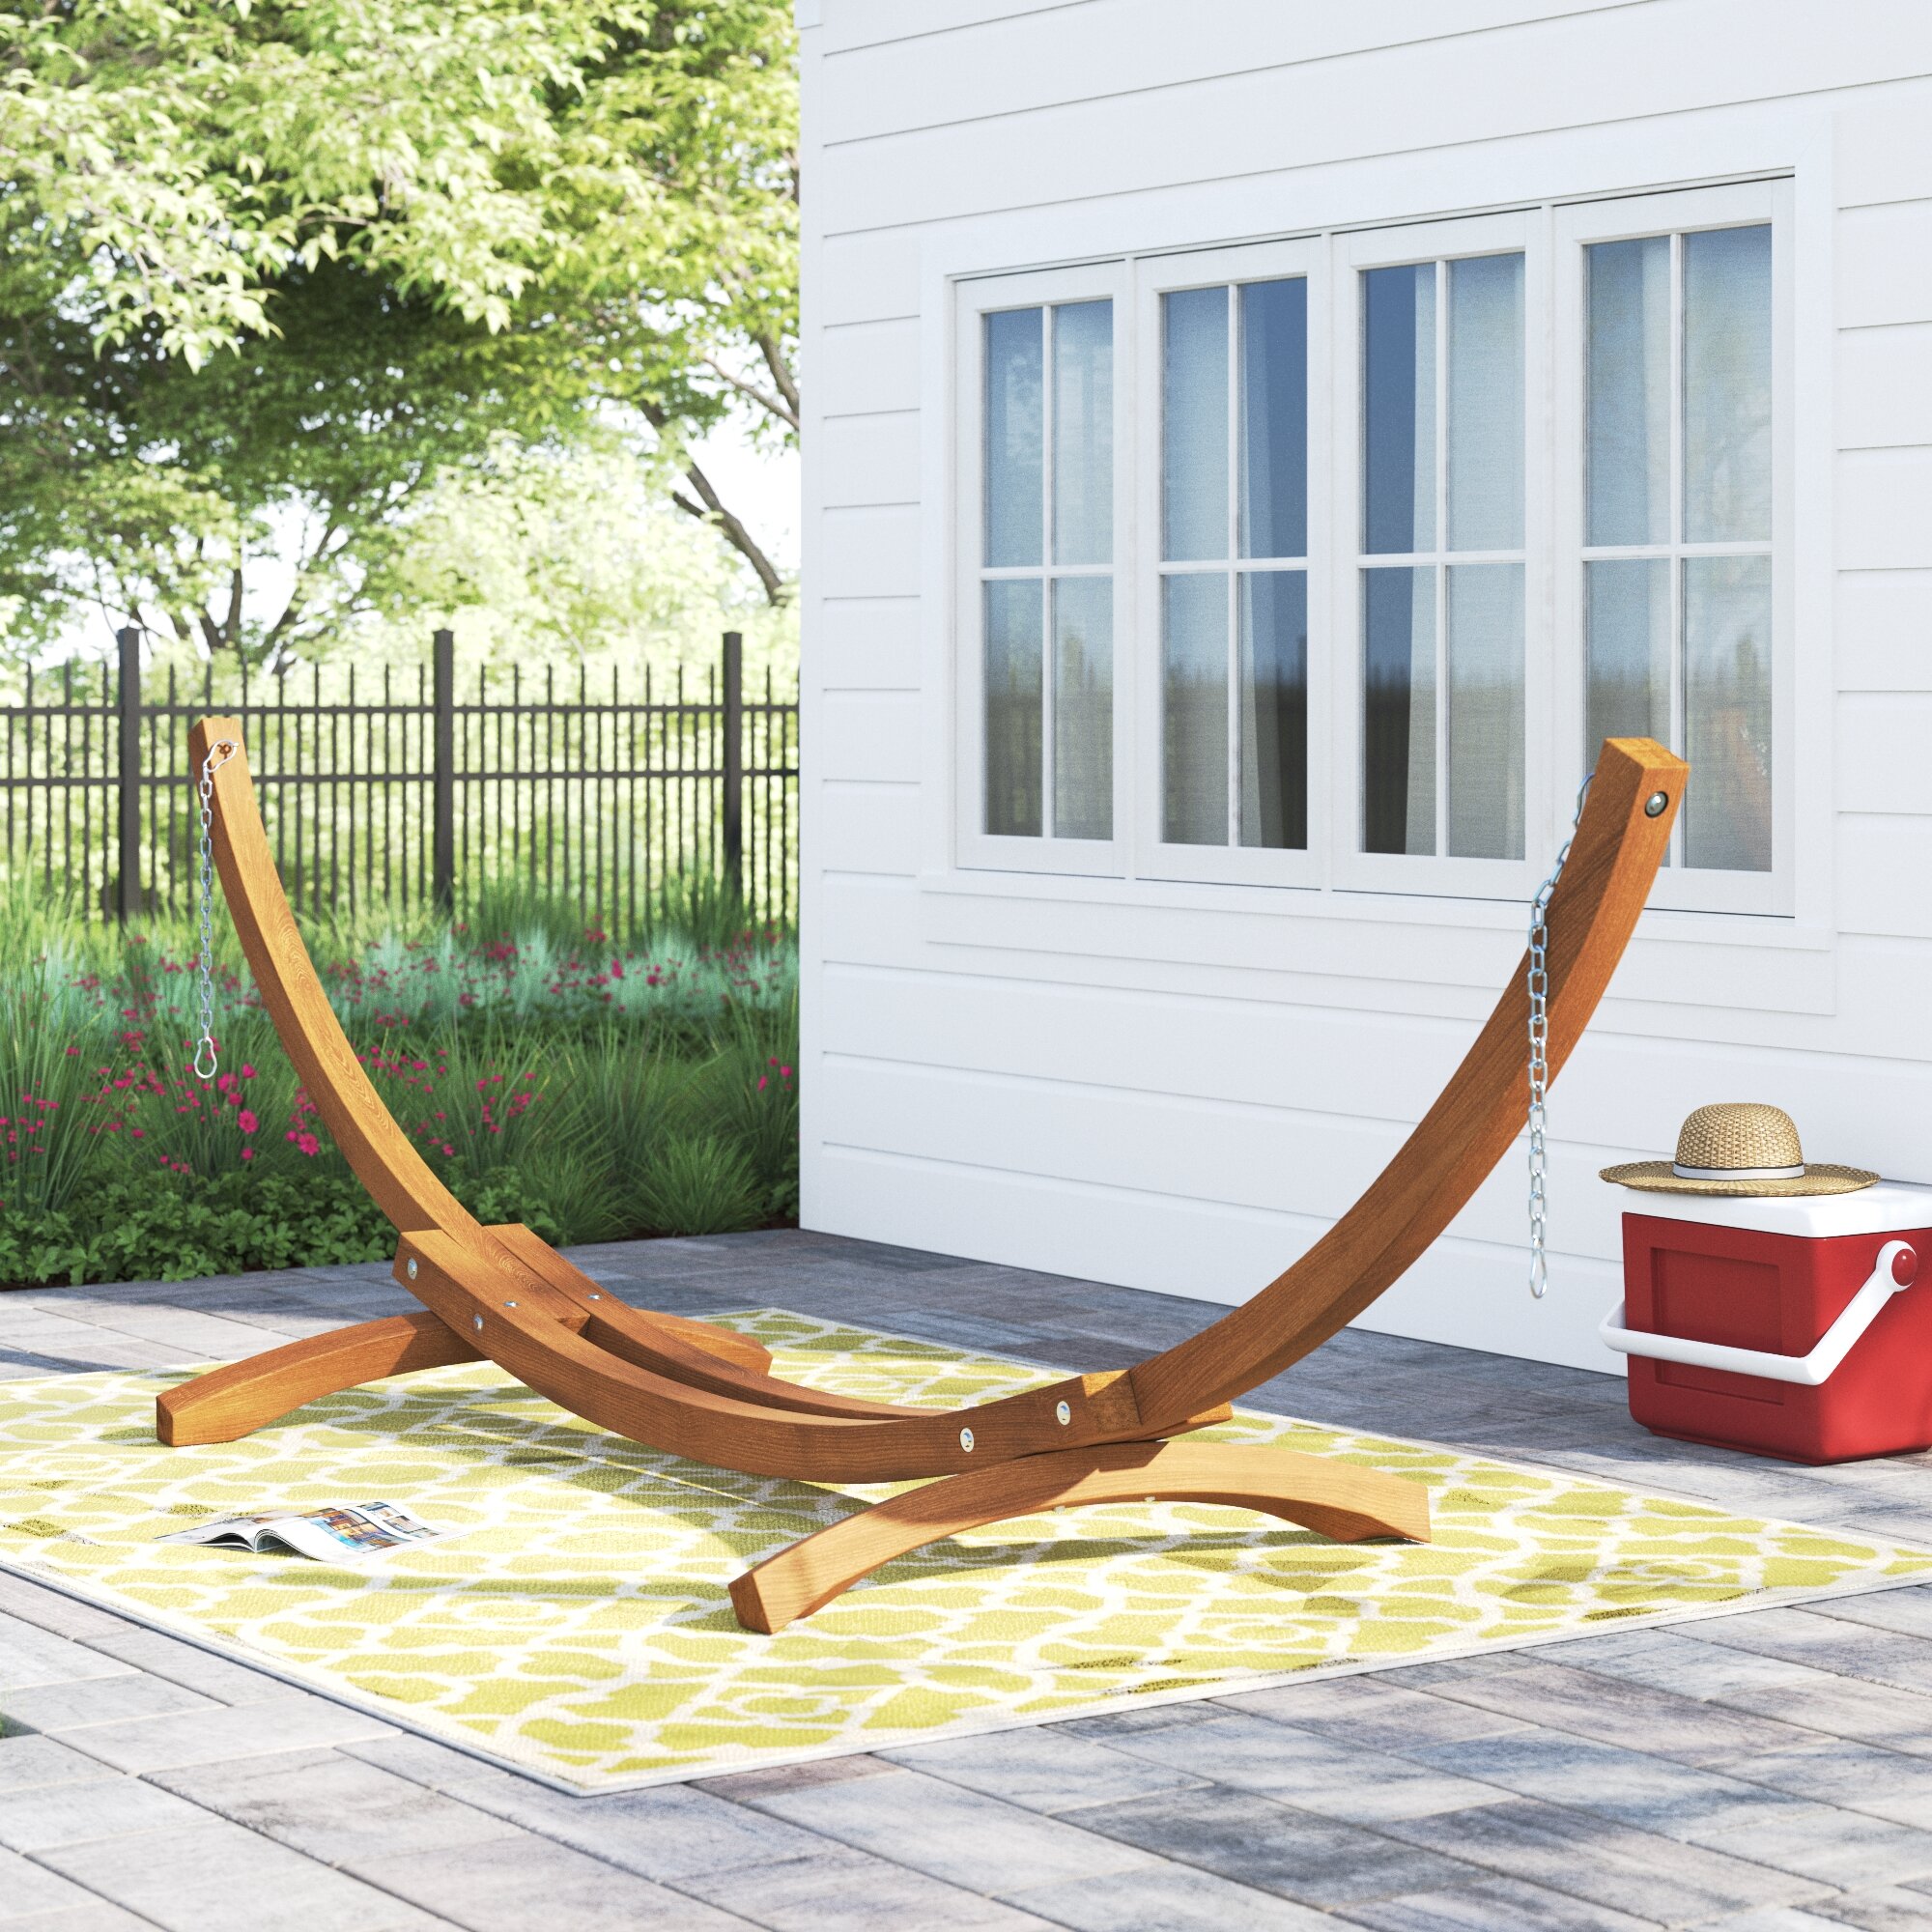 Wooden Curved Arc Hammock Solid Wood Patio Furniture Lounge Chair Stand Garden 